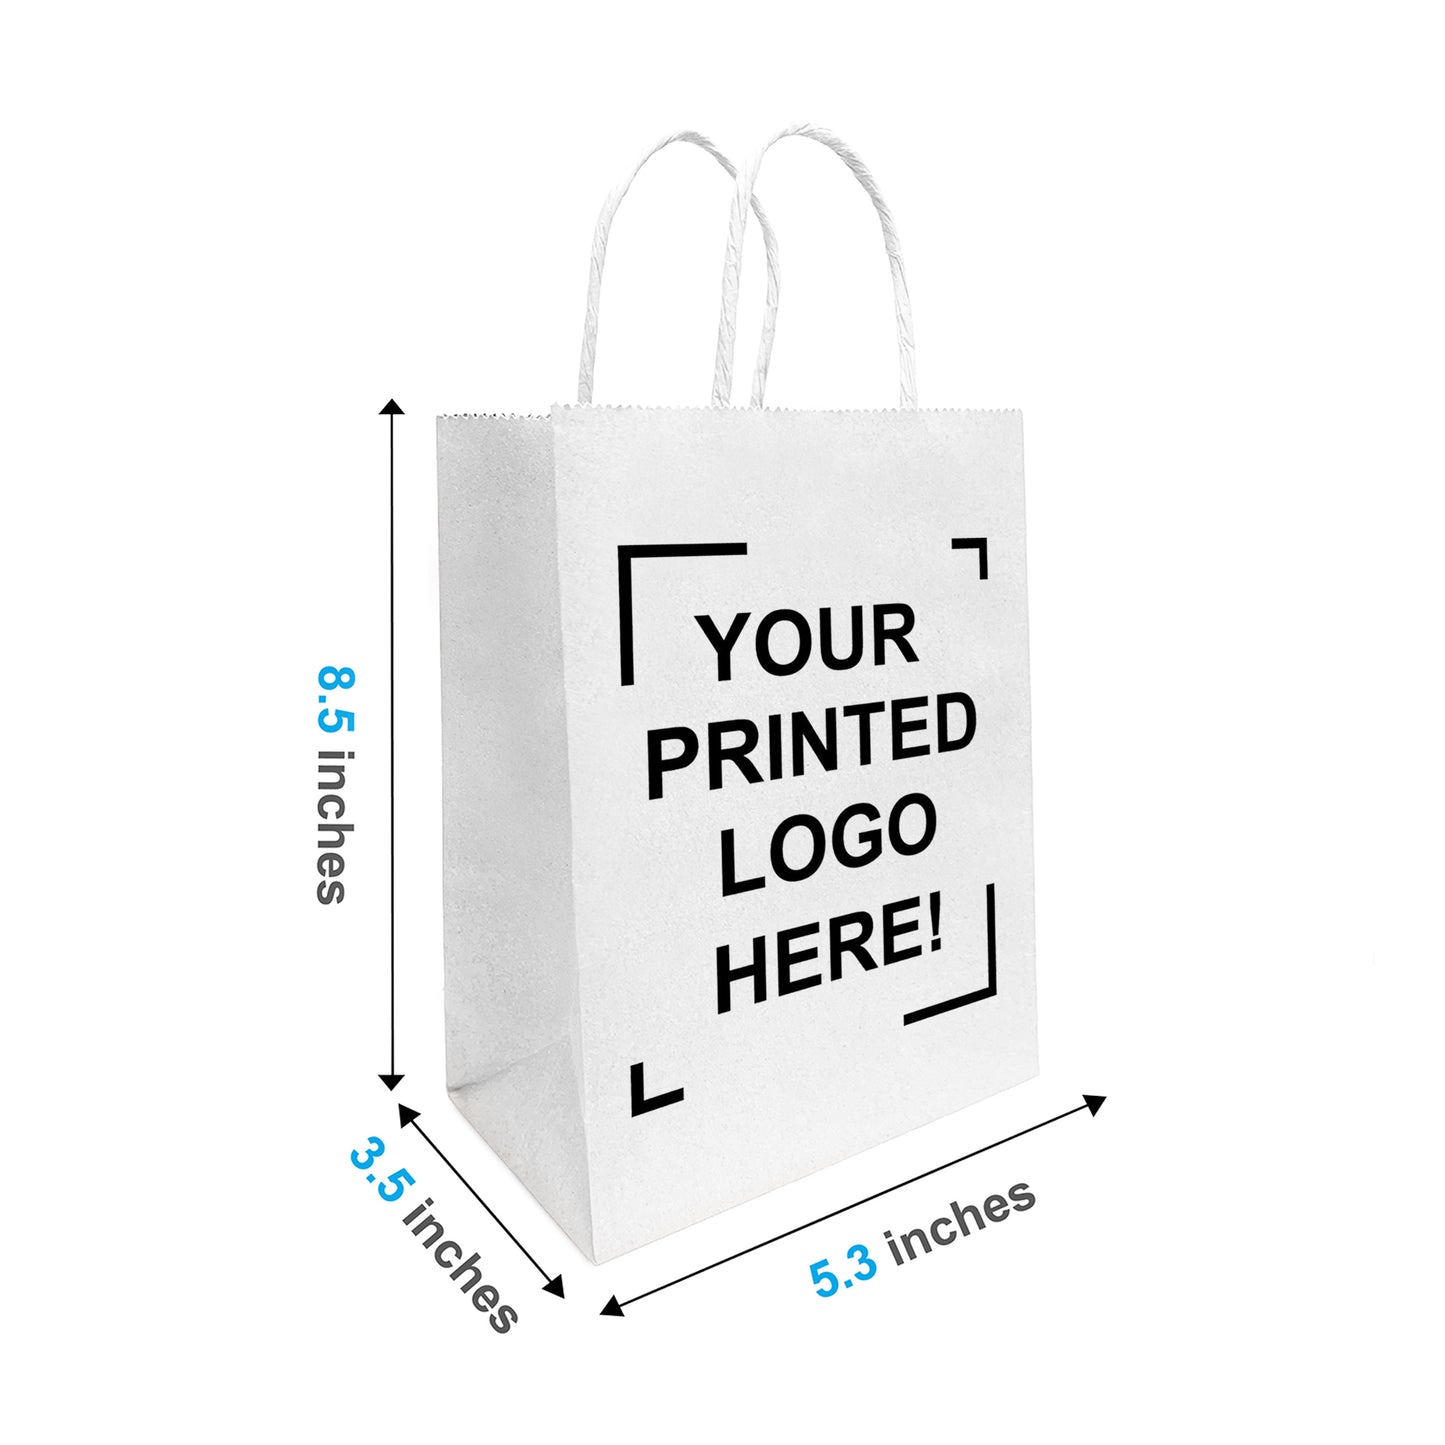 250 Pcs, Gem, 5.3x3.5x8.5 inches, White Kraft Paper Bags, with Twisted Handle, Full Color Custom Print